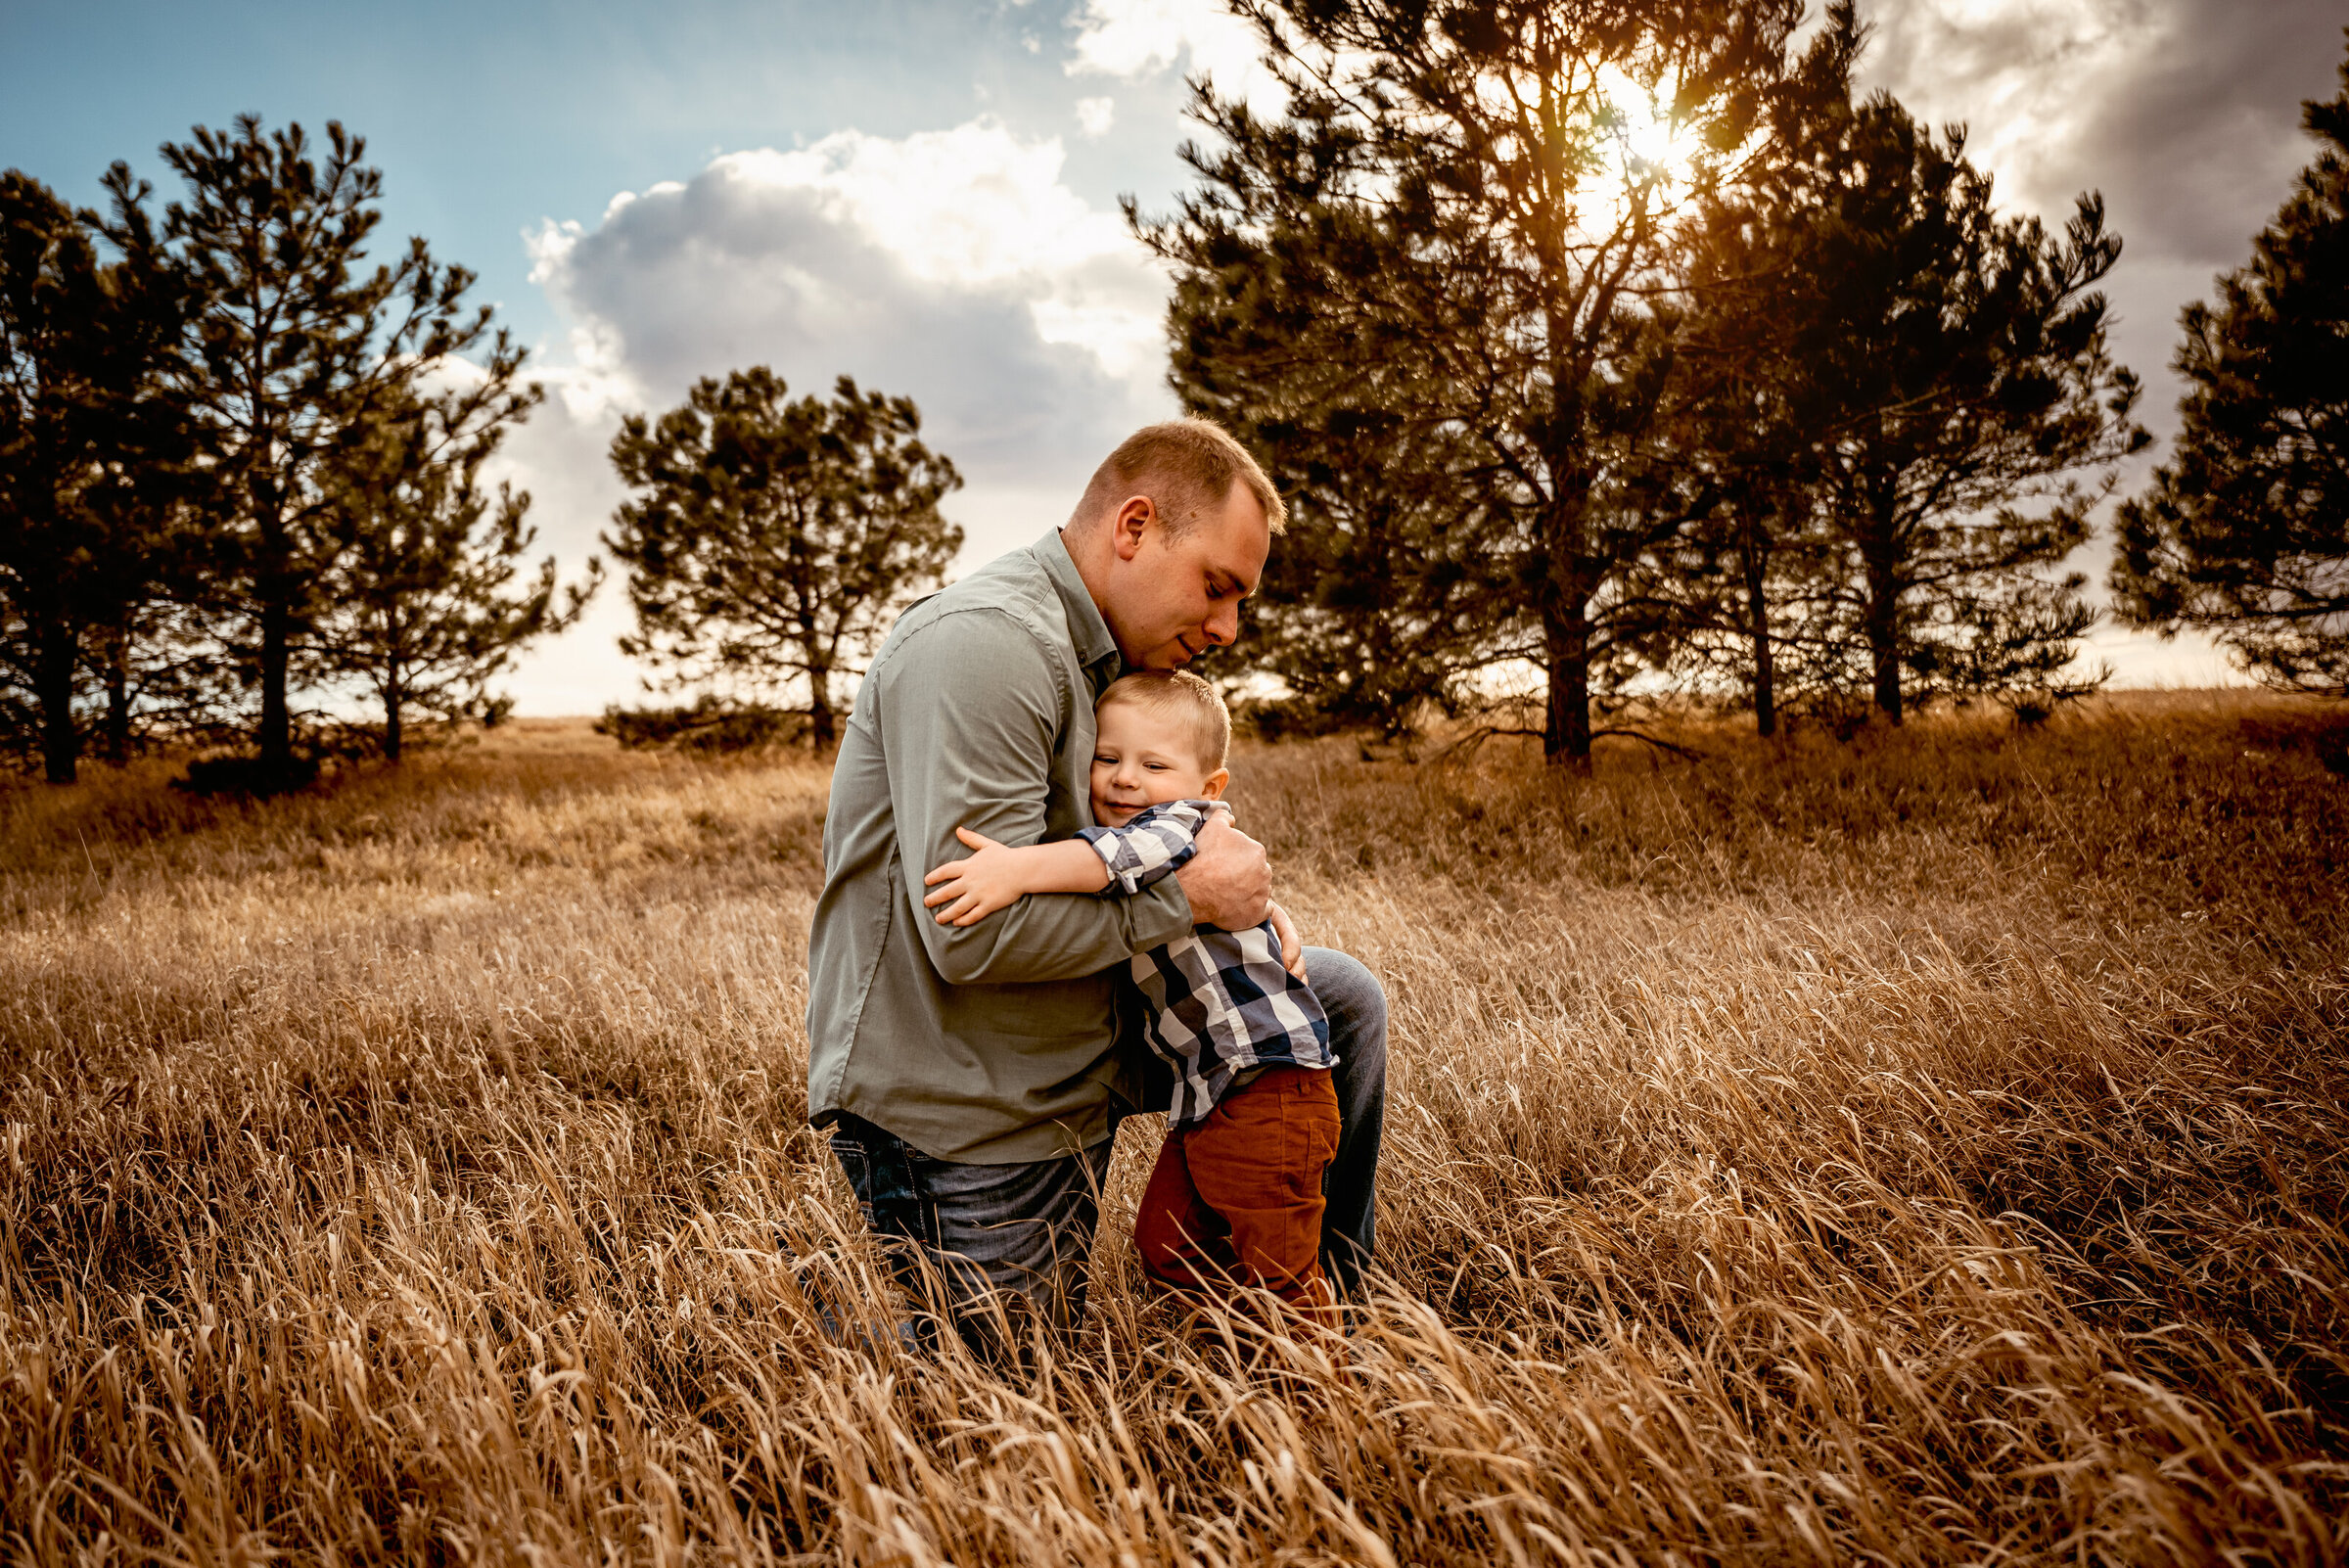 Dad and young son hug each other in field in front of pine trees